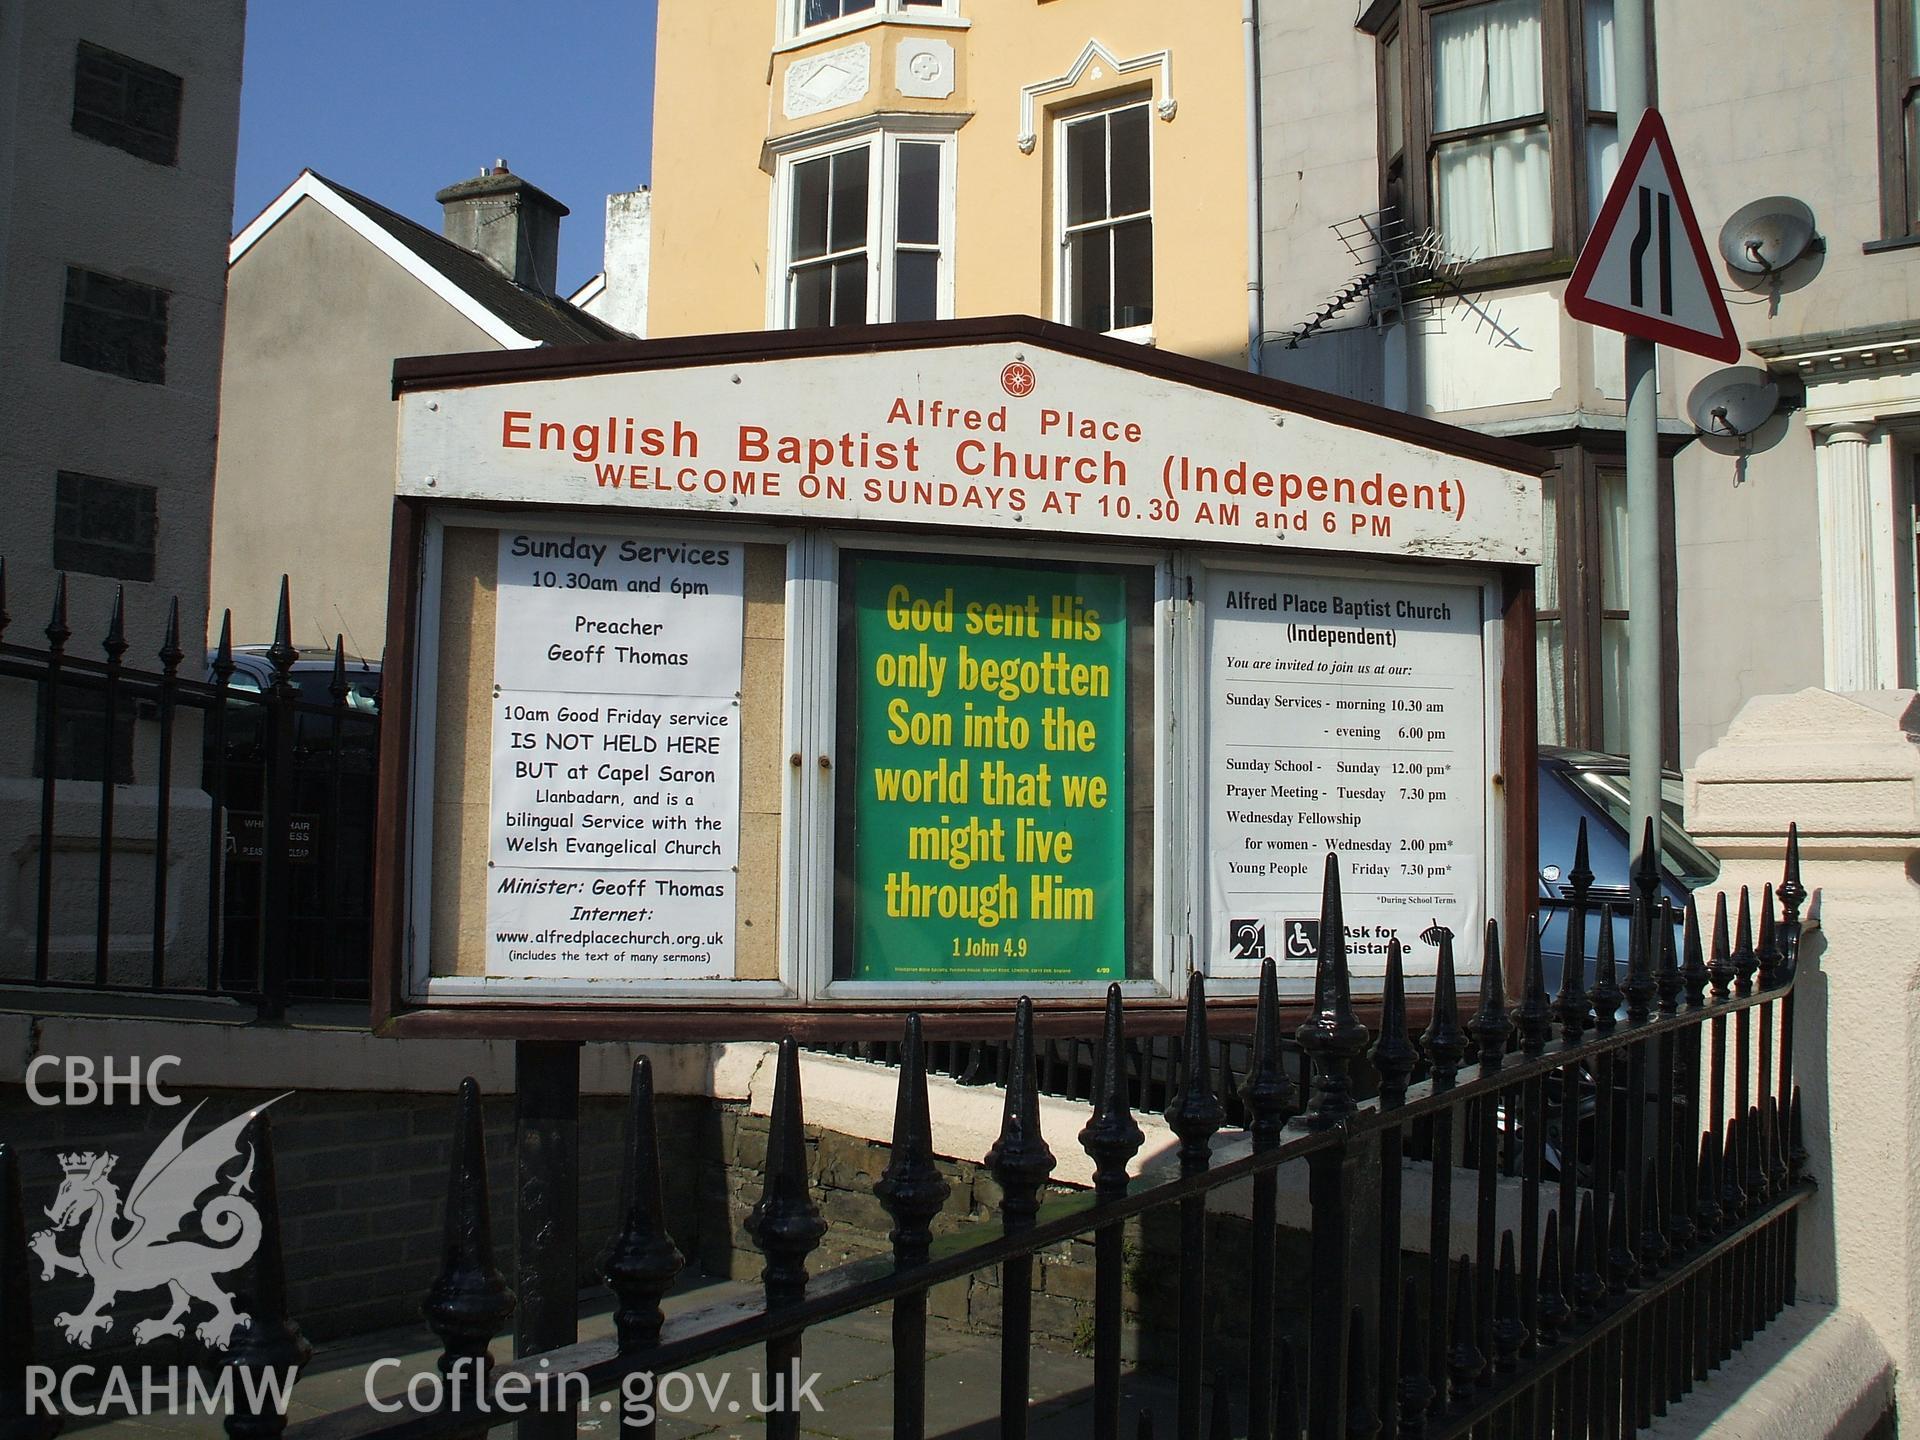 Colour digital photograph showing the sign outside the English Baptist Church, Alfred Place, Aberystwyth.